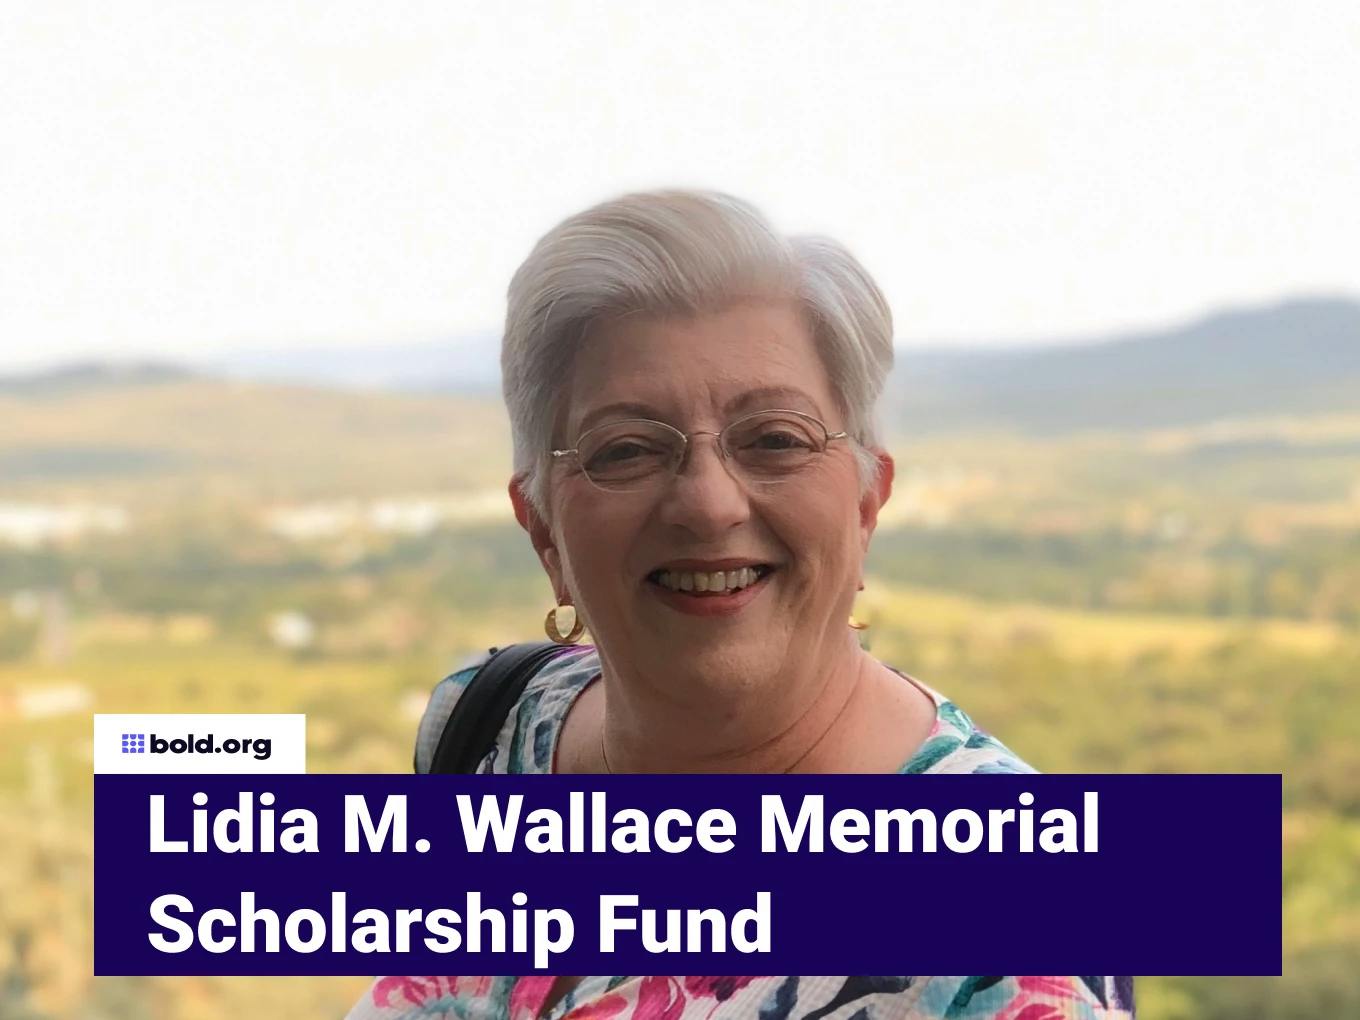 Lidia M. Wallace Memorial Scholarship Fund